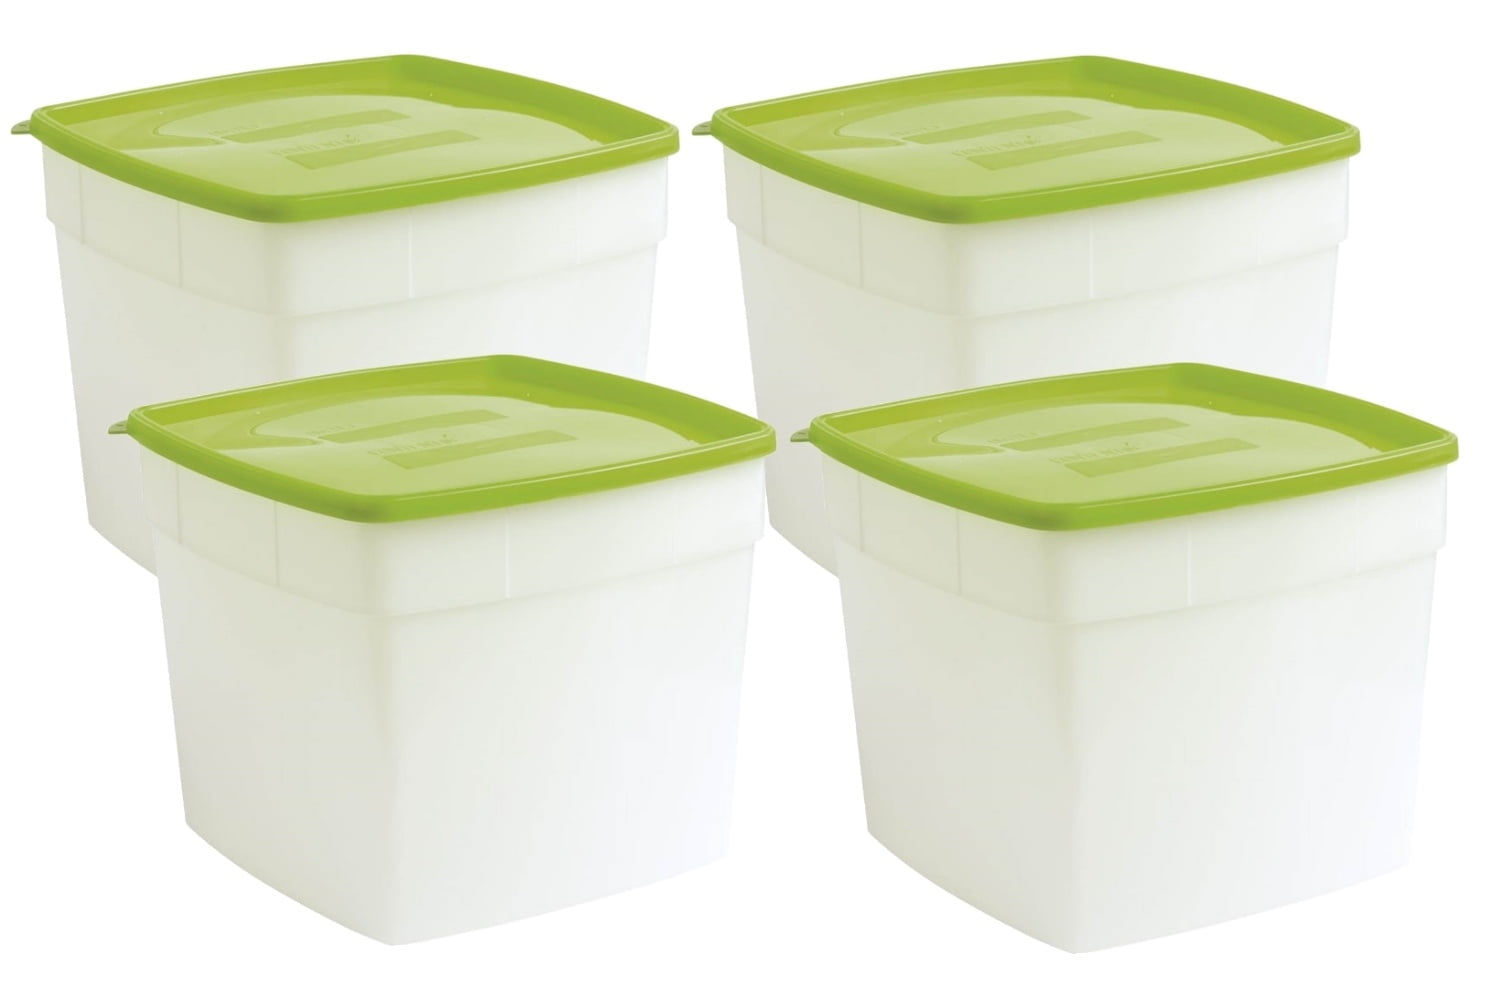 1 Quart Freezer Storage Container (3-Pack) - Arrow Home Products